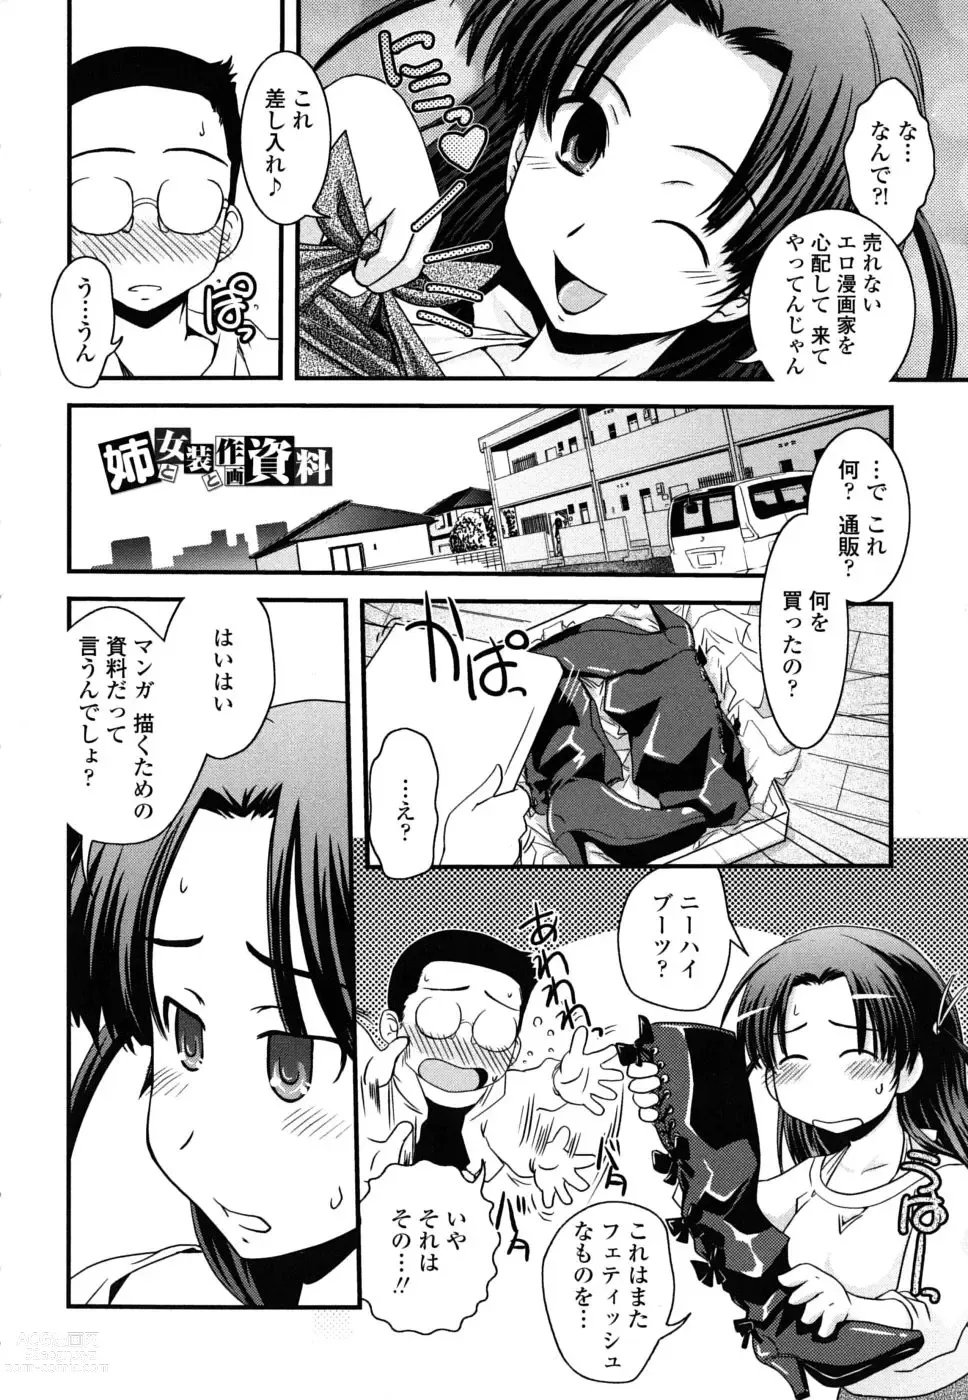 Page 10 of manga The elder sister, and disguising as a woman and comic artist